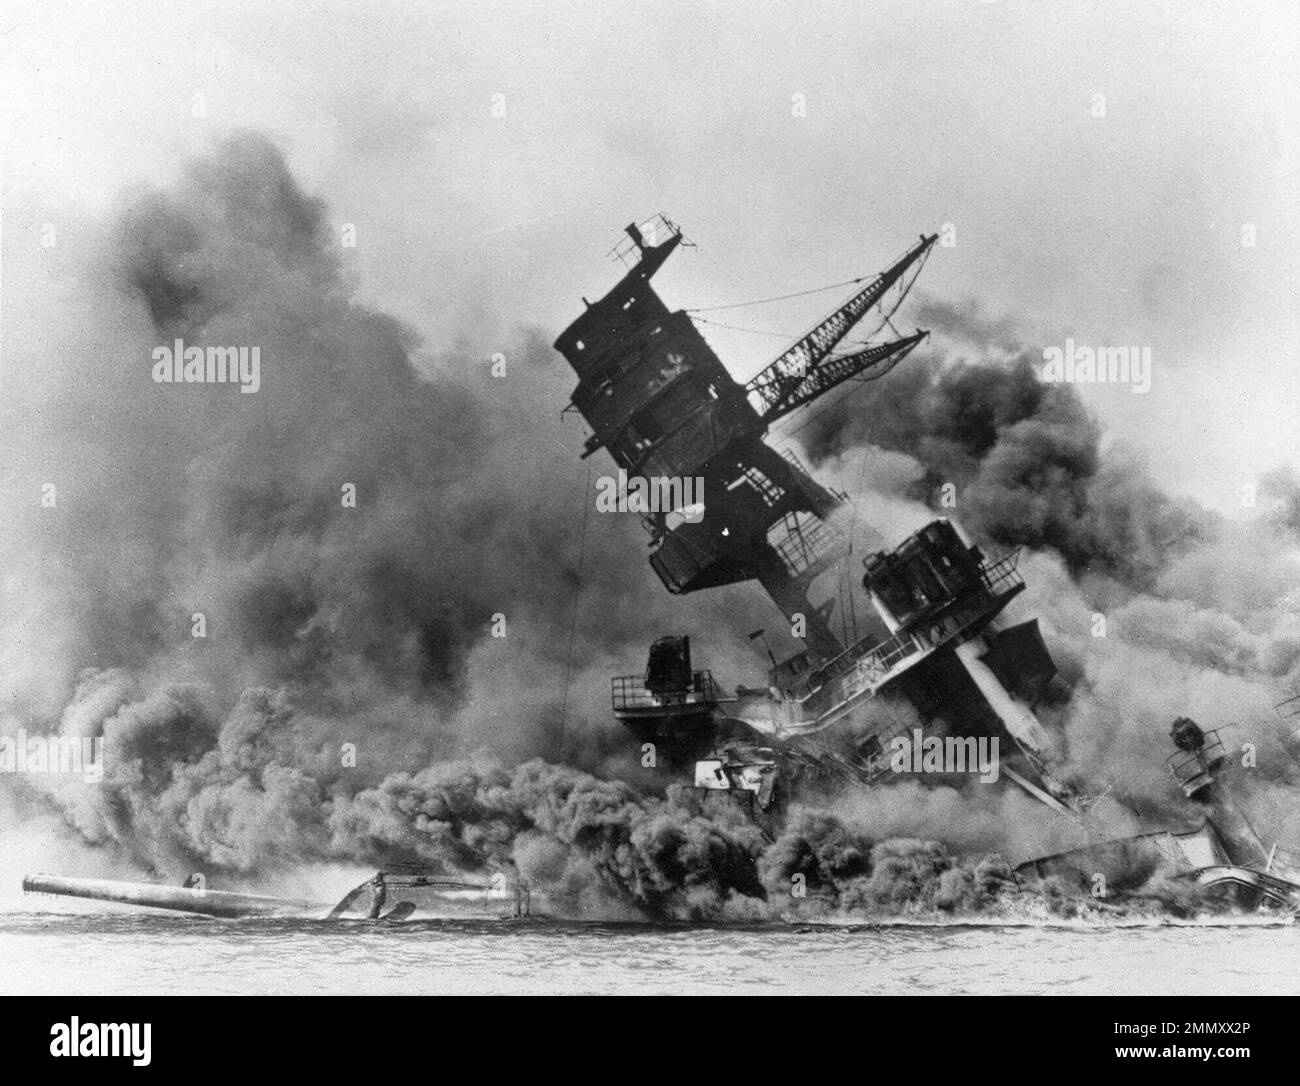 FILE - In this Dec. 7, 1941, file photo, smoke rises from the battleship USS Arizona as it sinks during a Japanese surprise attack on Pearl Harbor, Hawaii. A newly released memo by a wartime Japanese official provides what a historian says is the first look at the thinking of Emperor Hirohito and Prime Minister Hideki Tojo on the eve of the Japanese attack on Pearl Harbor that thrust the U.S. into World War II. (AP Photo, File) Stock Photo